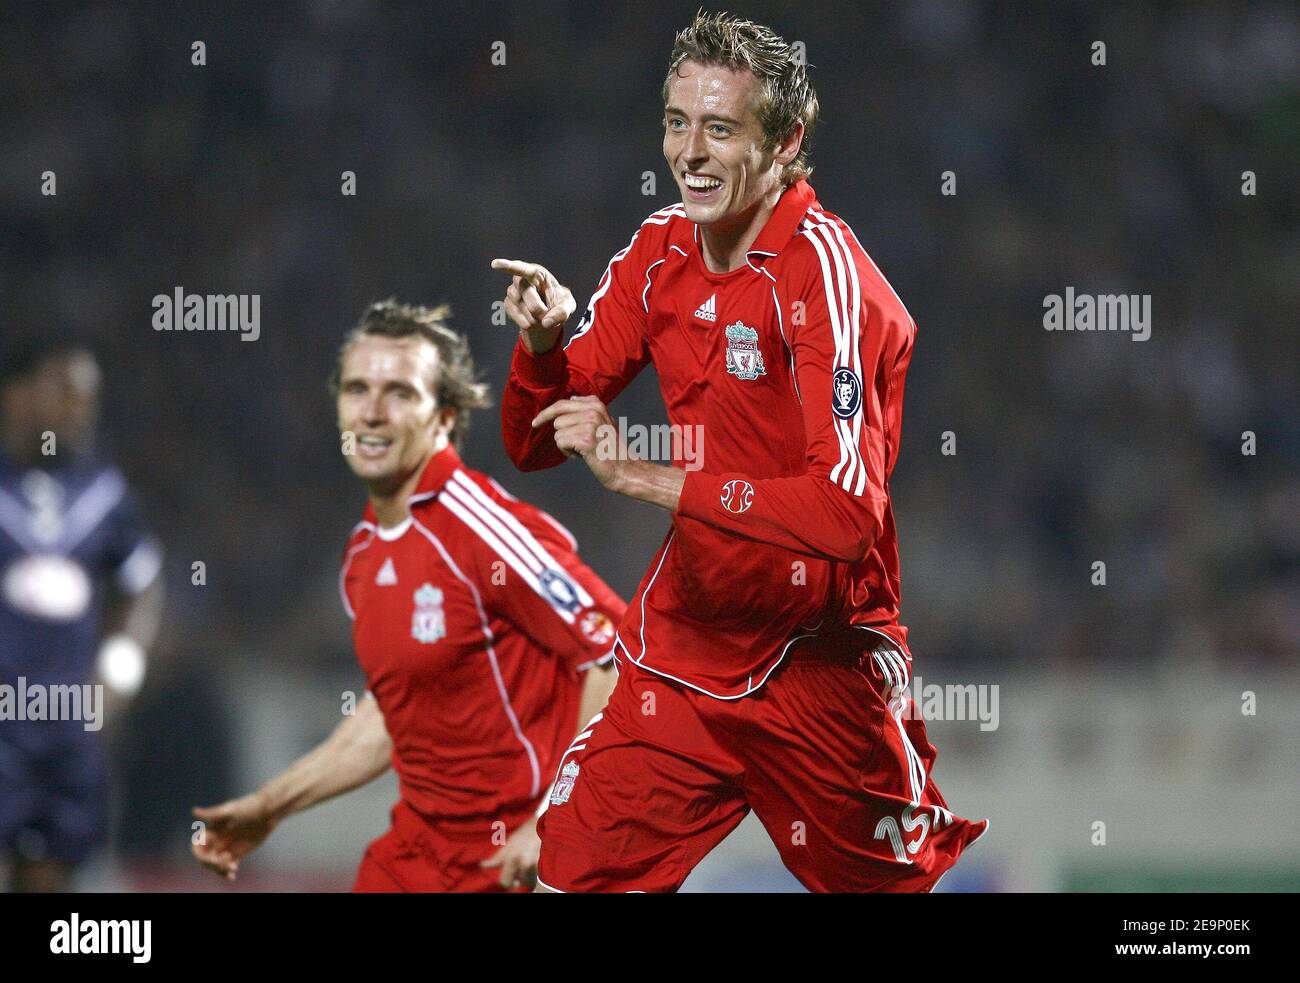 Liverpool's Peter Crouch celebrates his goal during the UEFA Champions League, Group C, Girondins de Bordeaux vs Liverpool FC at the Stade Chaban-Delmas in Bordeaux, France on October 18, 2006. Liverpool won 1-0. Photo by Christian Liewig/ABACAPRESS.COM Stock Photo